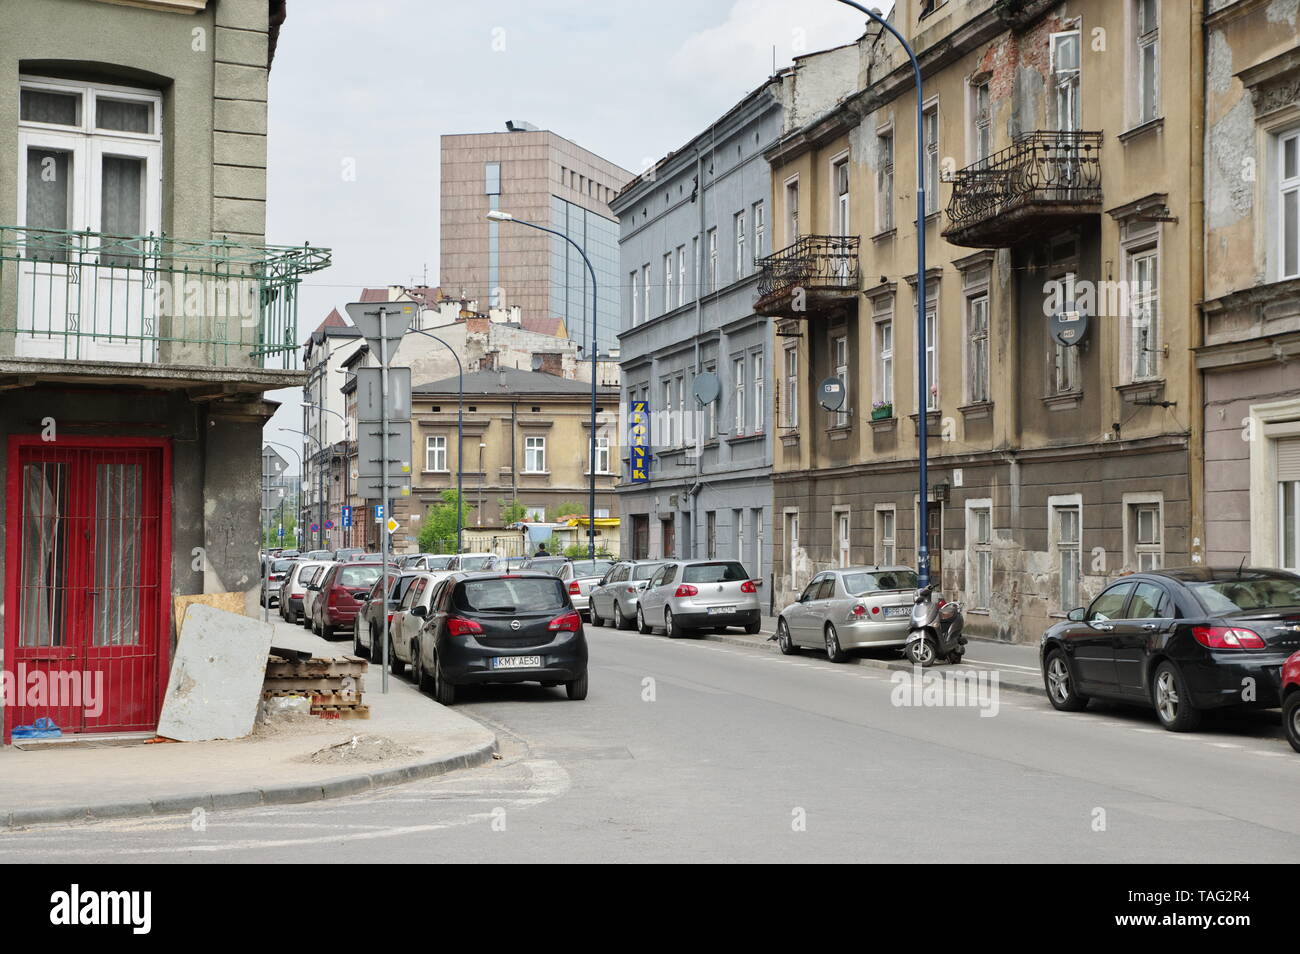 Krakow, Poland – May 12, 2019: district of Podgórze, Lwowska street. You can see old tenement houses and cars parked along the road. Stock Photo